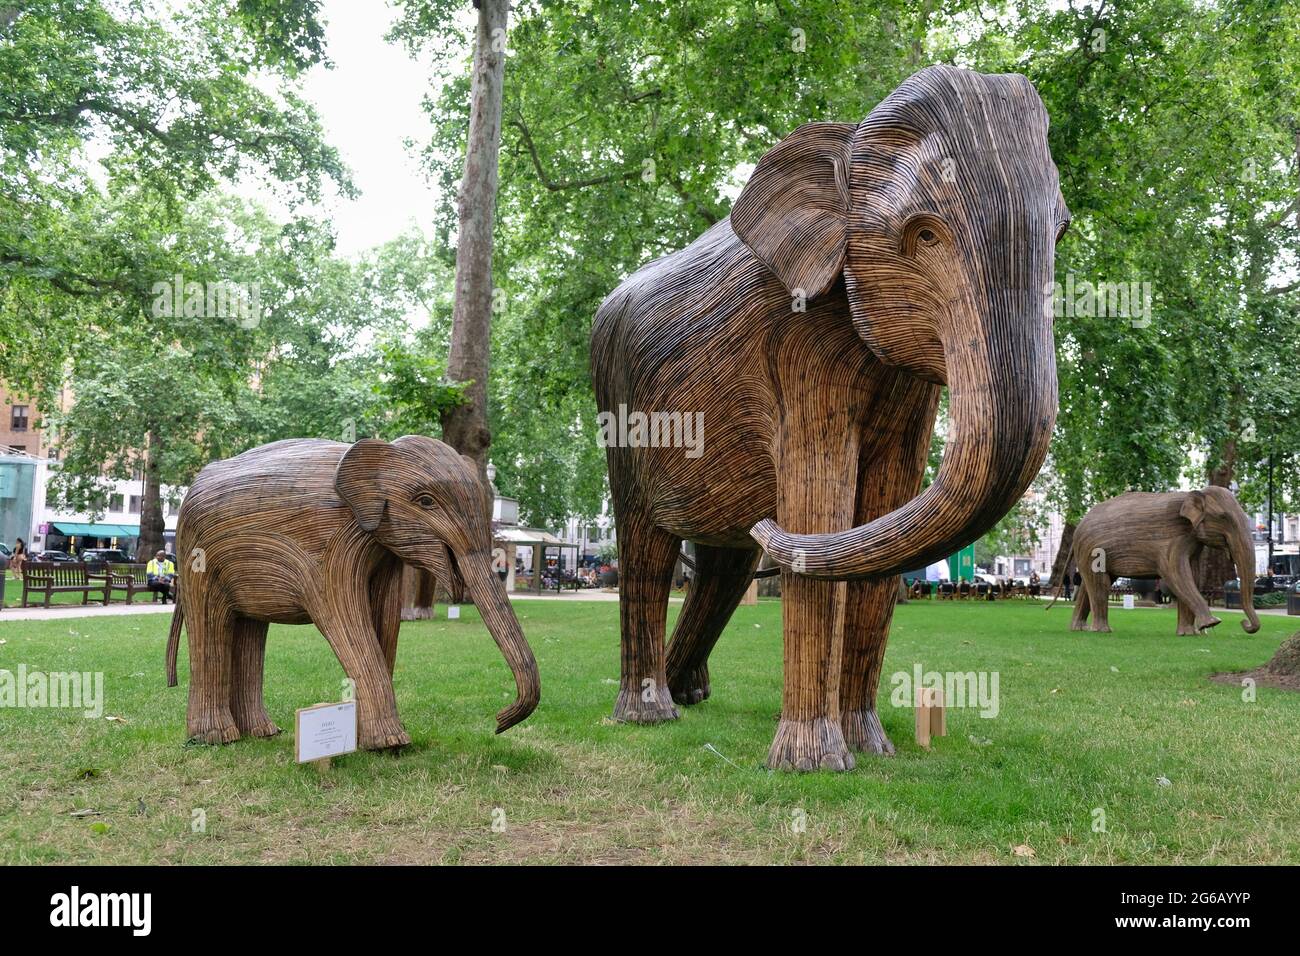 A herd of elephants are displayed in the green surroundings of Berkerley Square as part of an environmental campaign to highlight animal extinction. Stock Photo